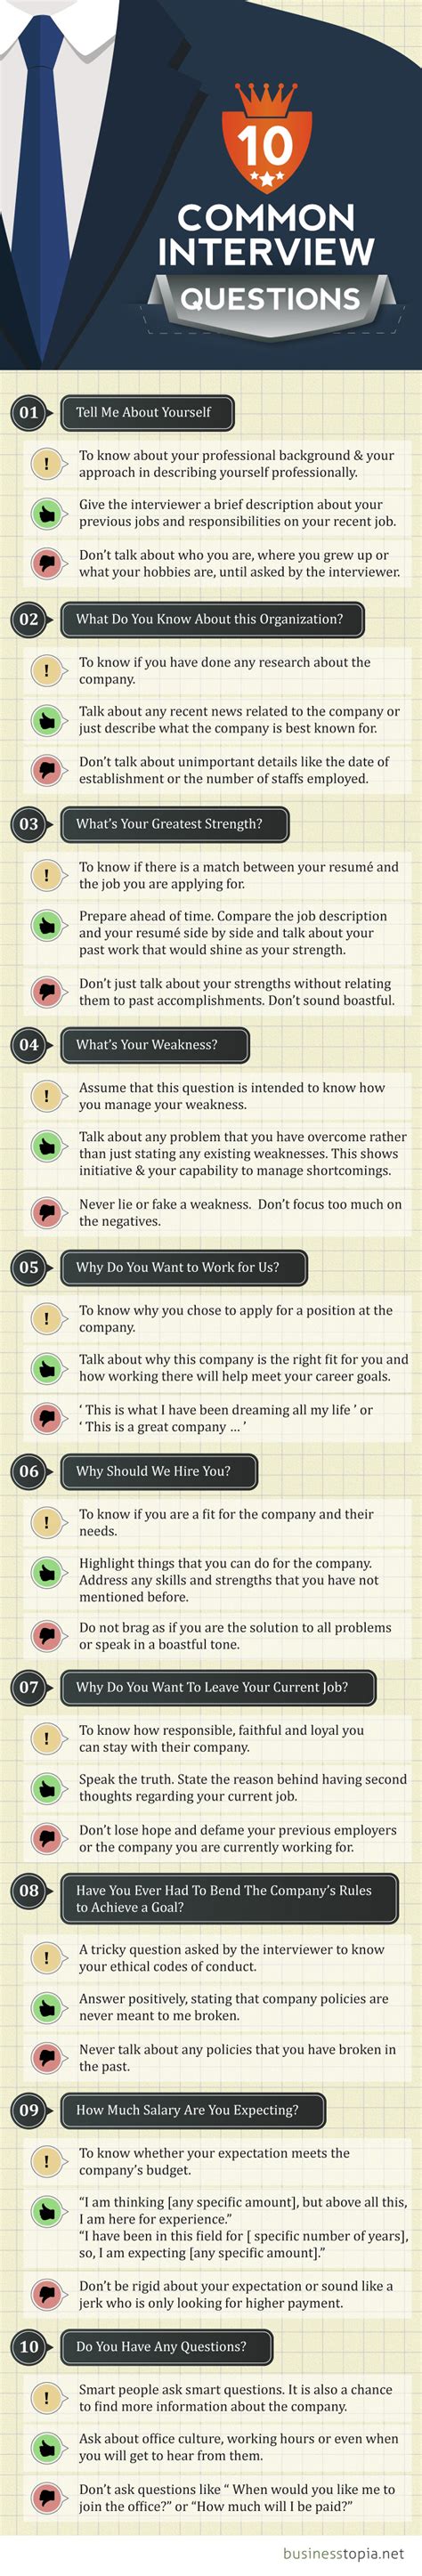 10 Common Interview Questions Visually